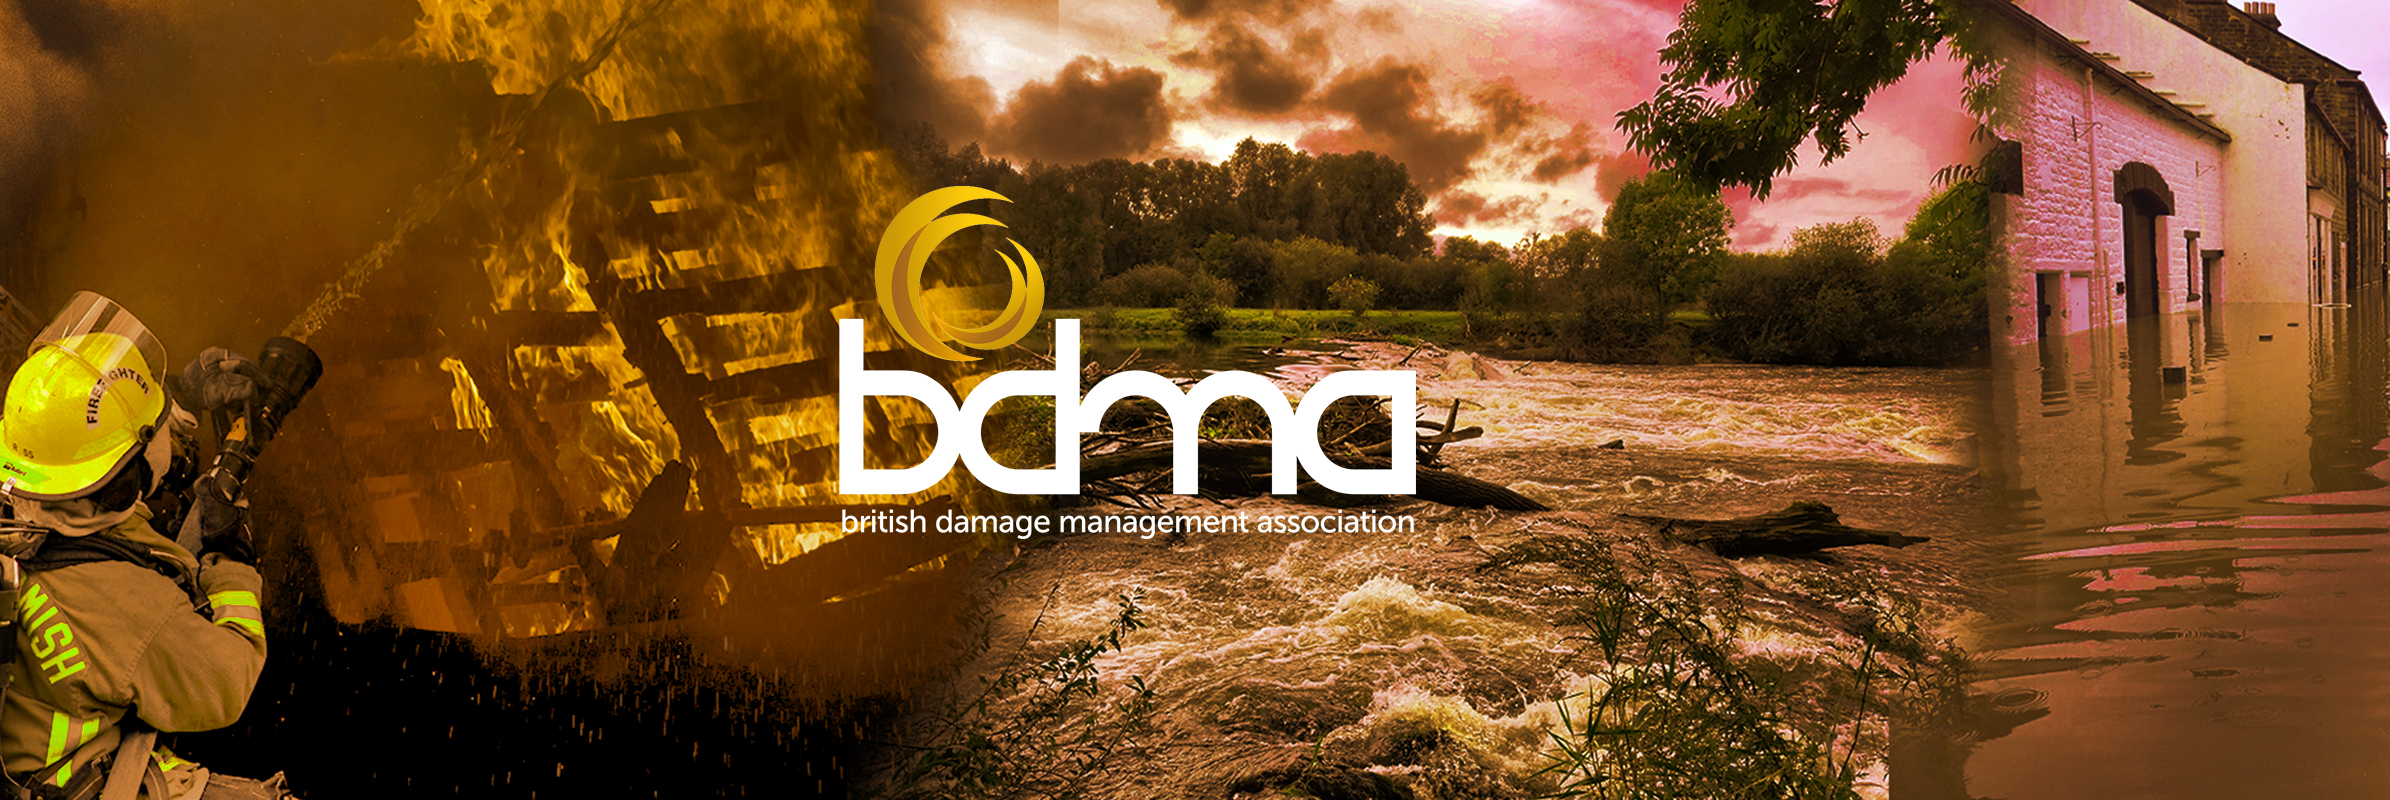 Flood Doctor Become Accredited Corporate Members of BDMA!